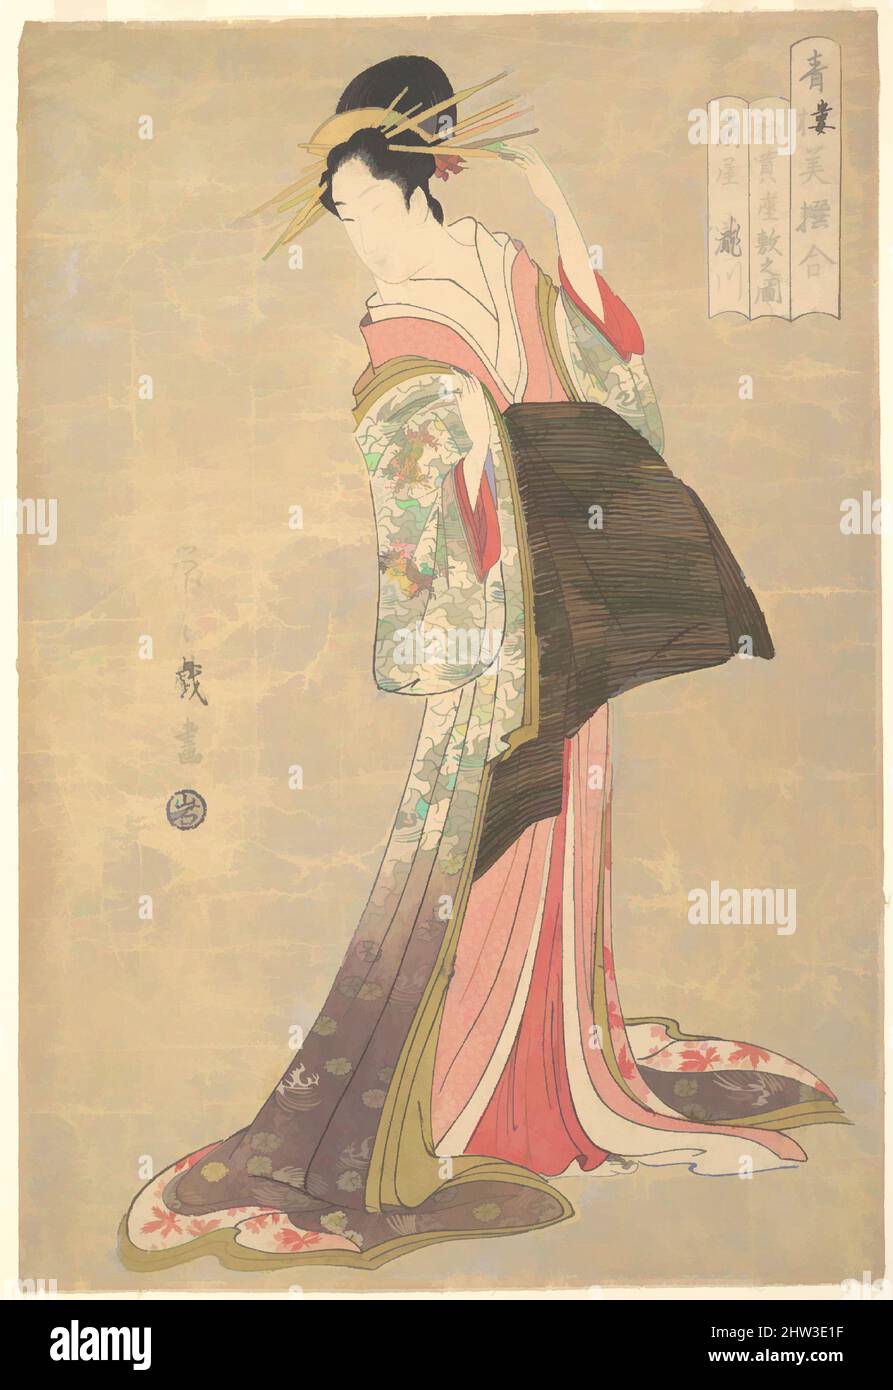 Art inspired by 「青楼美撰合　初売座敷之図　扇屋　滝川」, Takigawa of the Ōgiya House, from the series A Comparison of Selected Beauties of the Pleasure Quarters (Seirō bisen awase), Edo period (1615–1868), ca. 1794–95, Japan, Polychrome woodblock print; ink and color on paper, H. 14 5/8 in. (37.1 cm); W, Classic works modernized by Artotop with a splash of modernity. Shapes, color and value, eye-catching visual impact on art. Emotions through freedom of artworks in a contemporary way. A timeless message pursuing a wildly creative new direction. Artists turning to the digital medium and creating the Artotop NFT Stock Photo